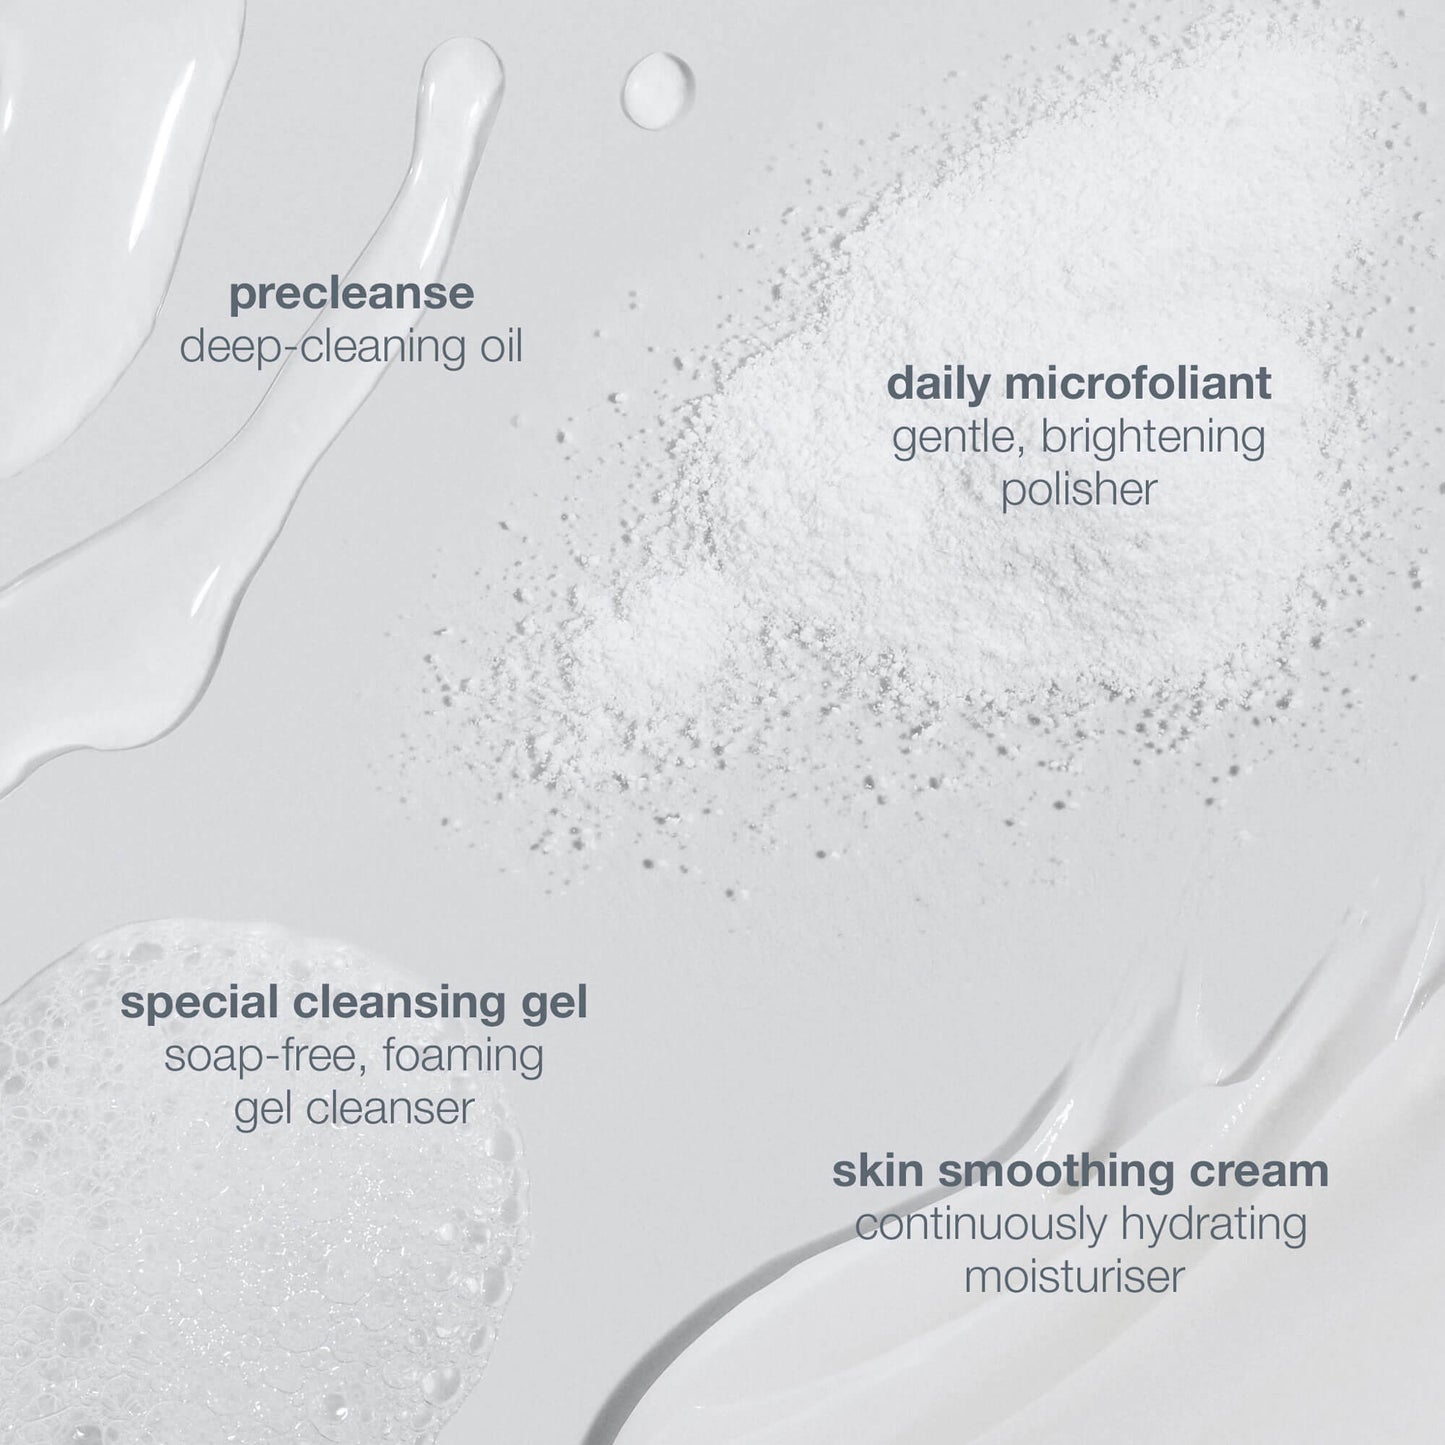 Discover healthy skin kit product form of each product. Precleanse, deep-cleaning oil. Daily microfoliant a gently, brightening polisher in a powder form. Special cleansing gel, a soap-free, foaming gel cleanser. Skin smoothing cream, continuously hydrating moisturiser.